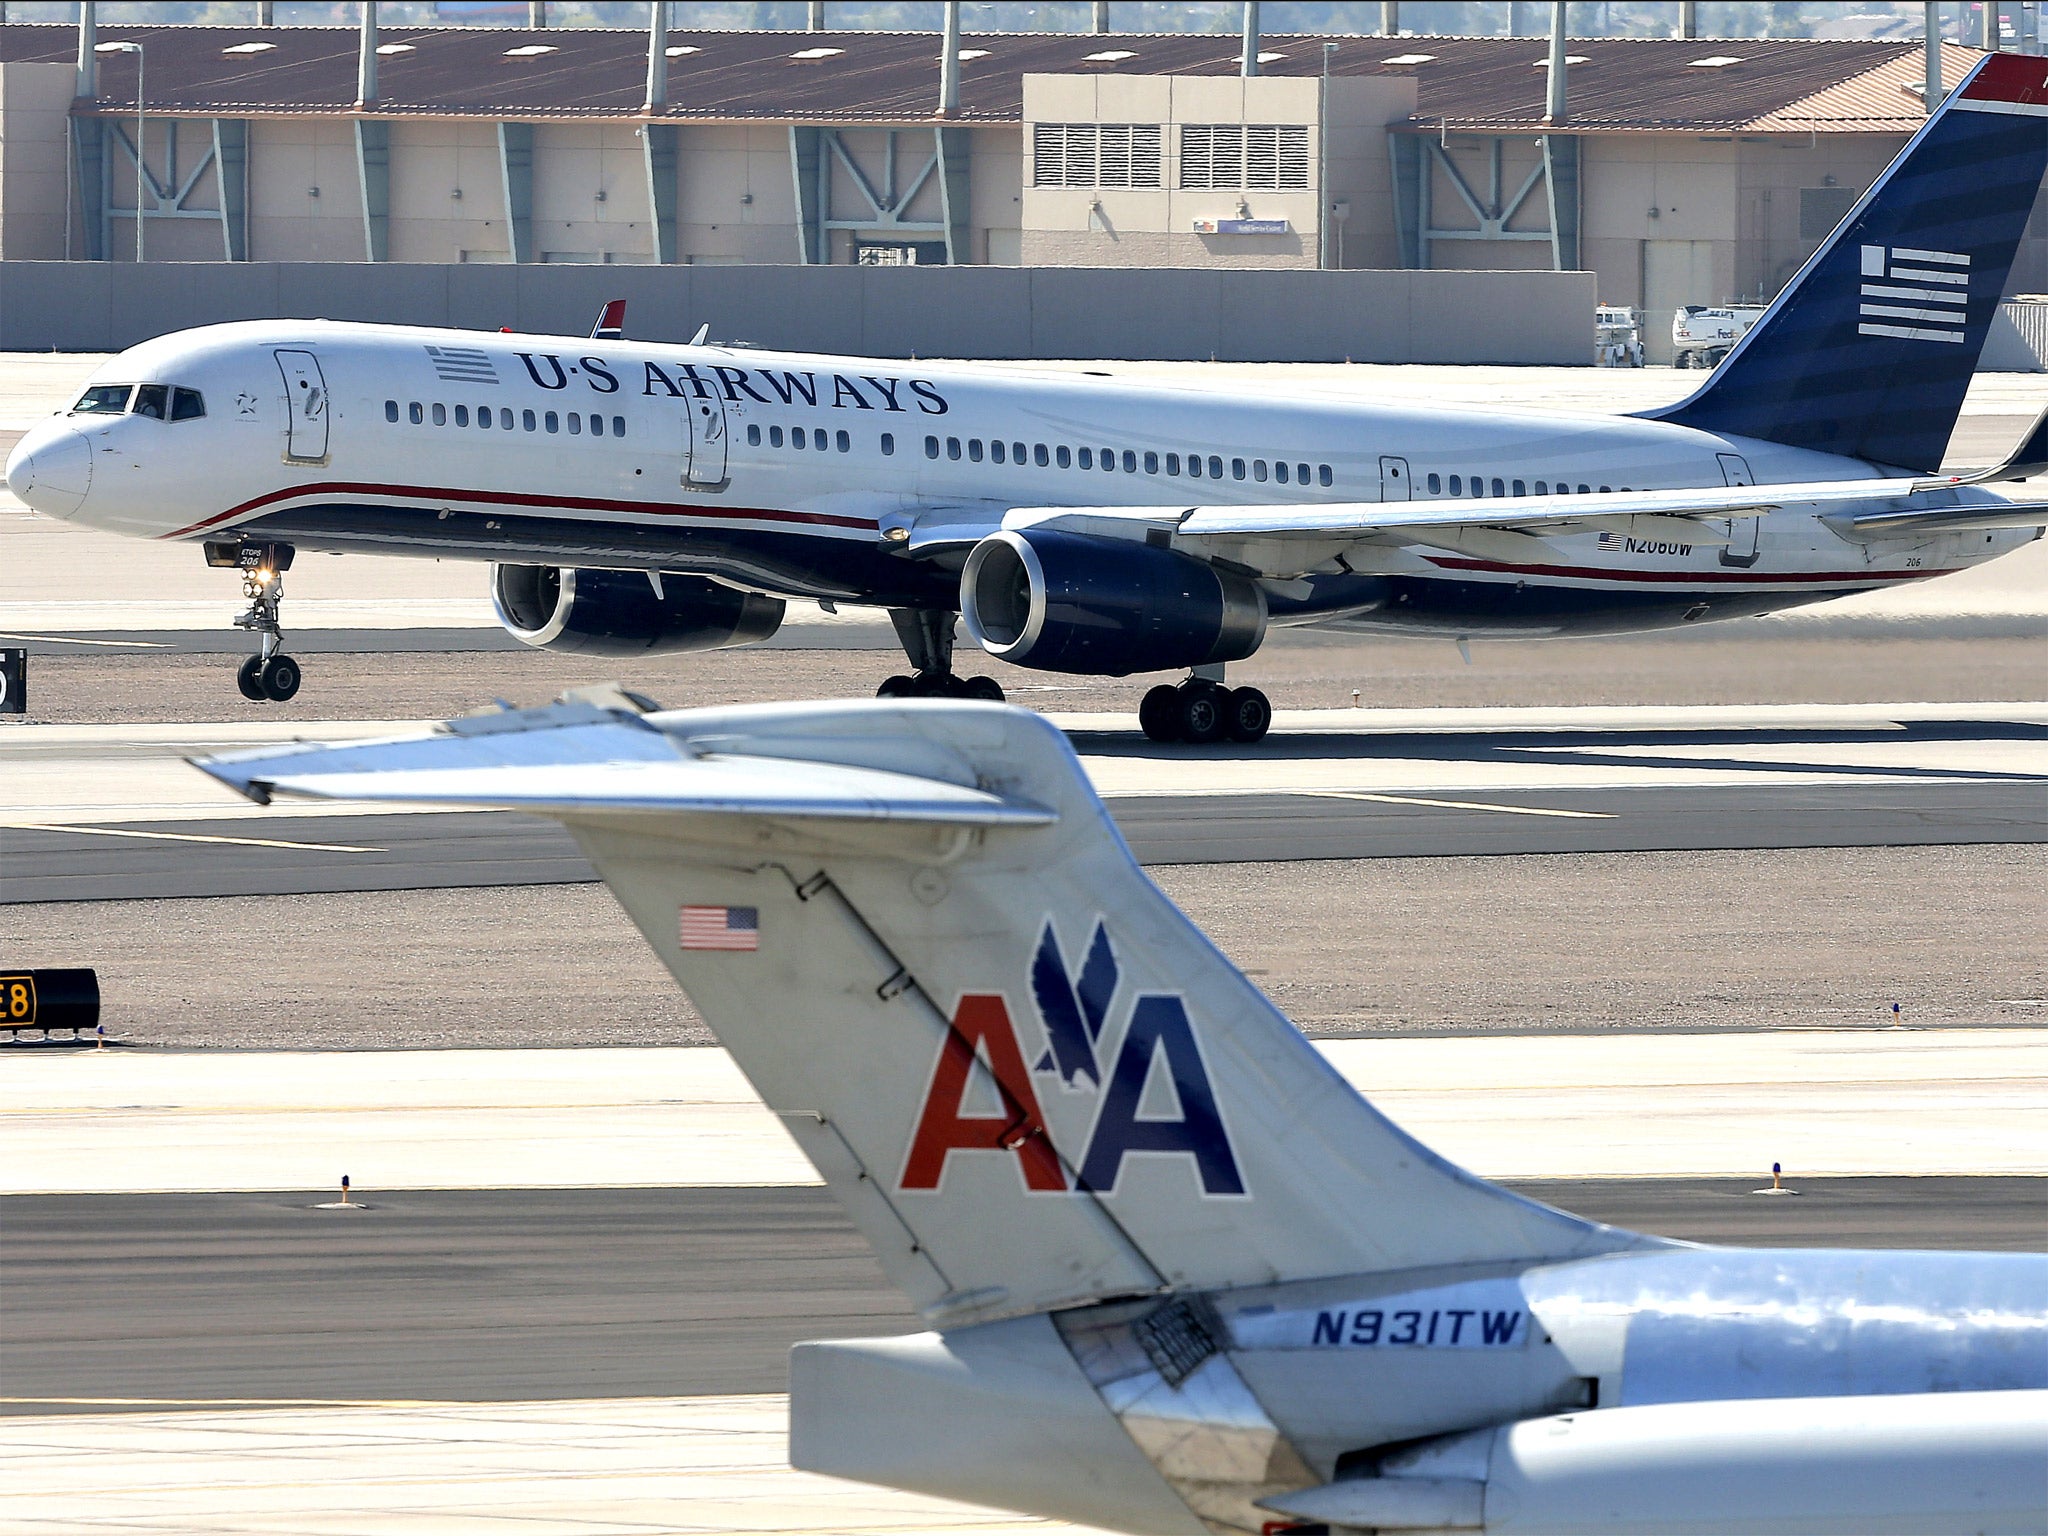 Shares of both airlines plunged on news of the lawsuit